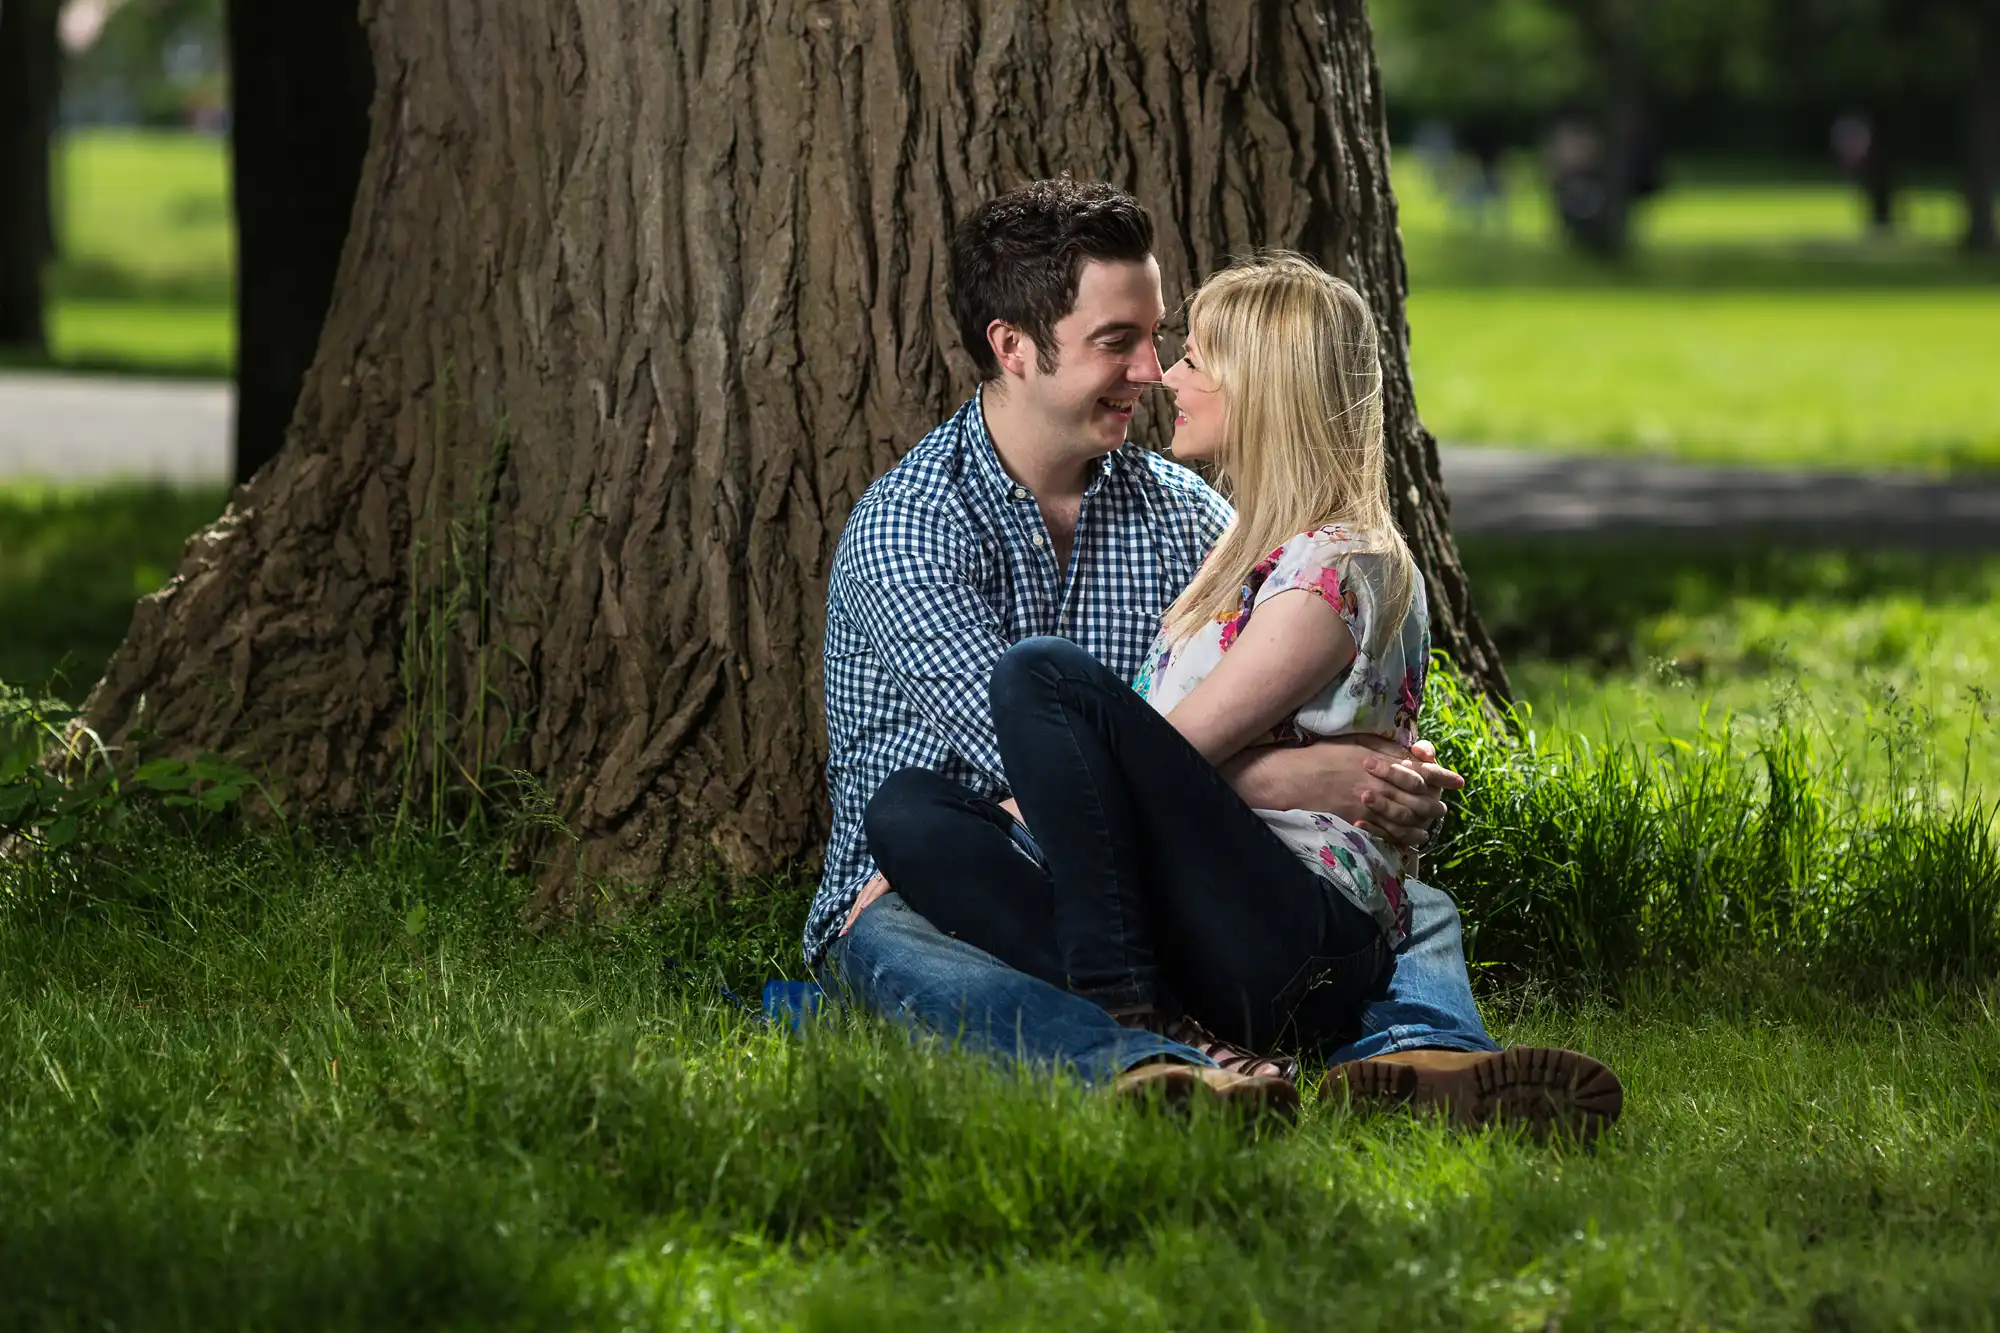 A couple sitting closely under a tree in a park, smiling at each other, surrounded by lush green grass.